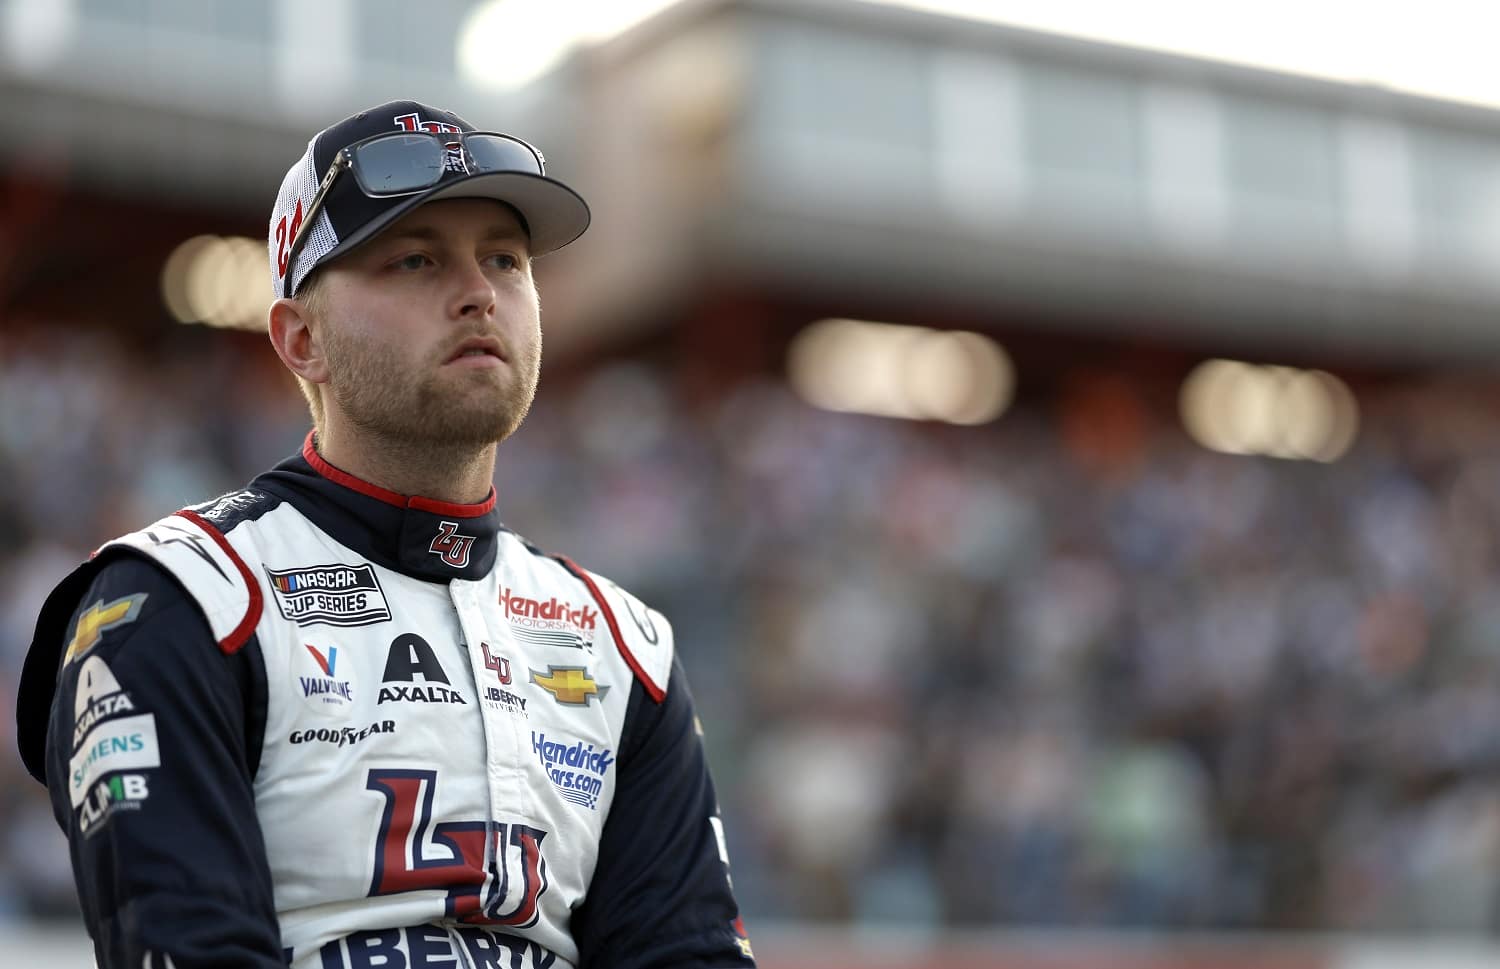 William Byron waits on the grid prior to the NASCAR Cup Series All-Star Race at North Wilkesboro Speedway on May 21, 2023, in North Wilkesboro, North Carolina.